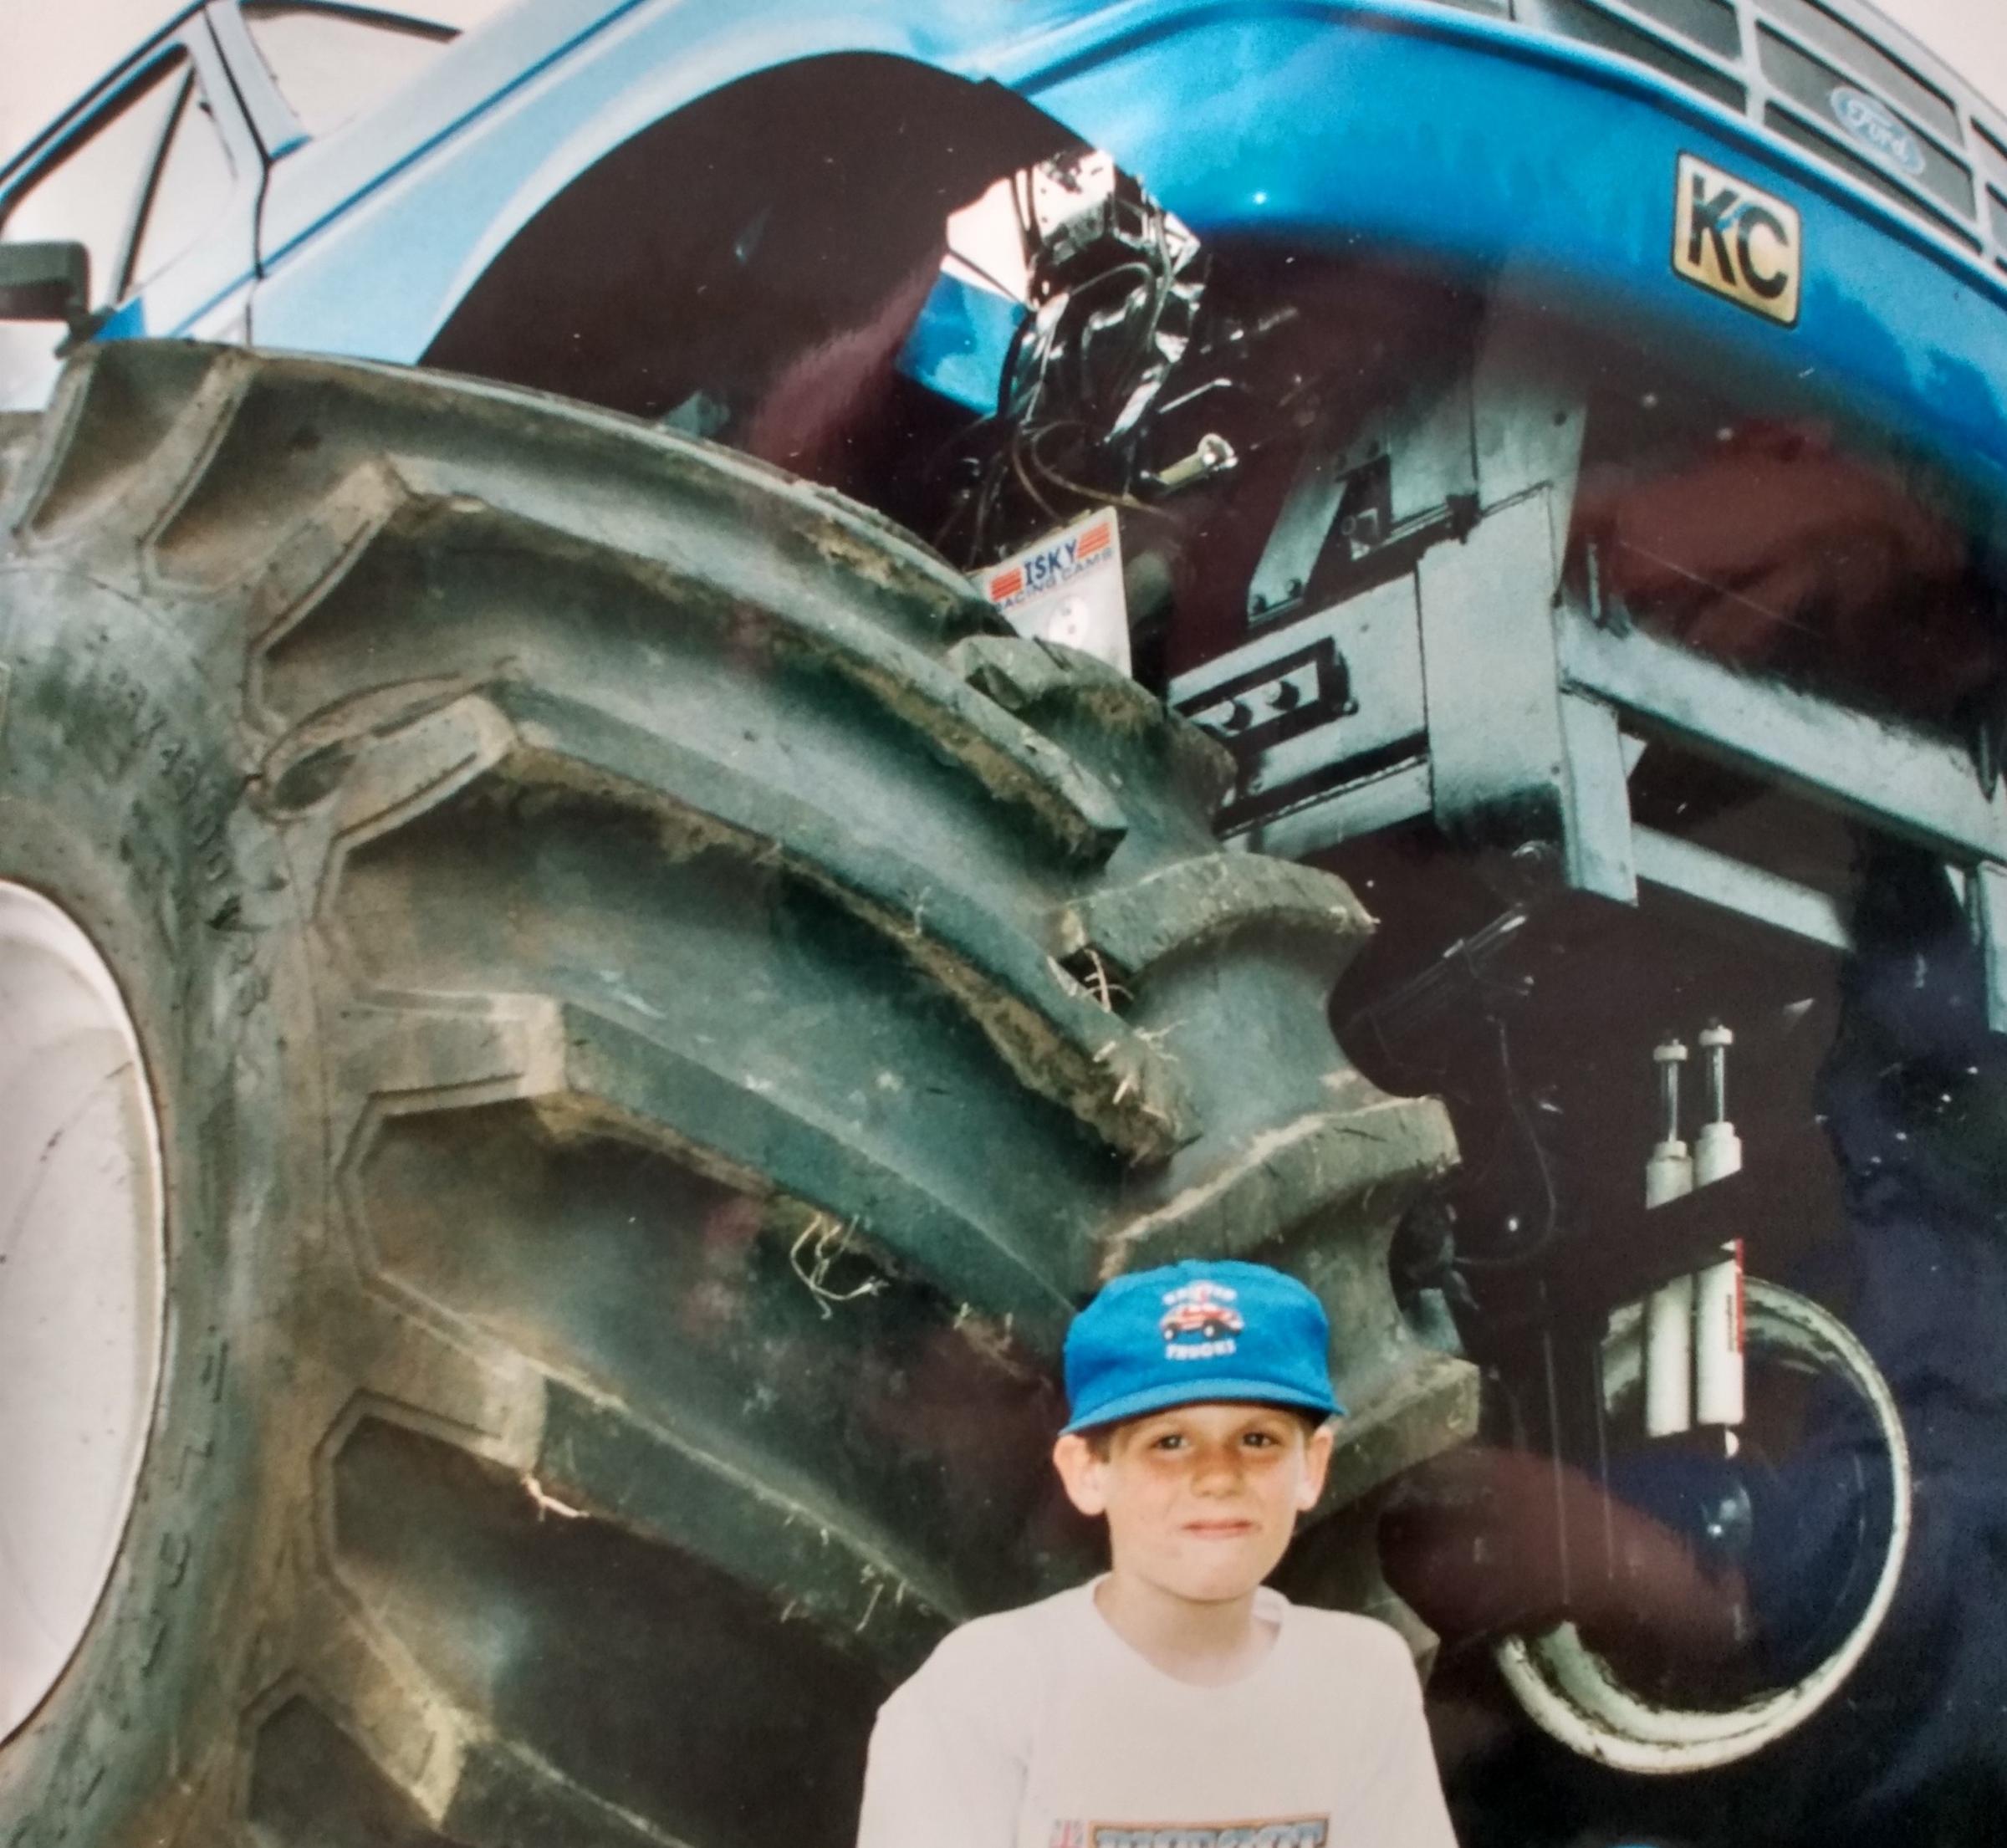 July 1993 and Jack Forder was dwarfed by the Big Foot truck which rolled into the city for the International Thrill Show